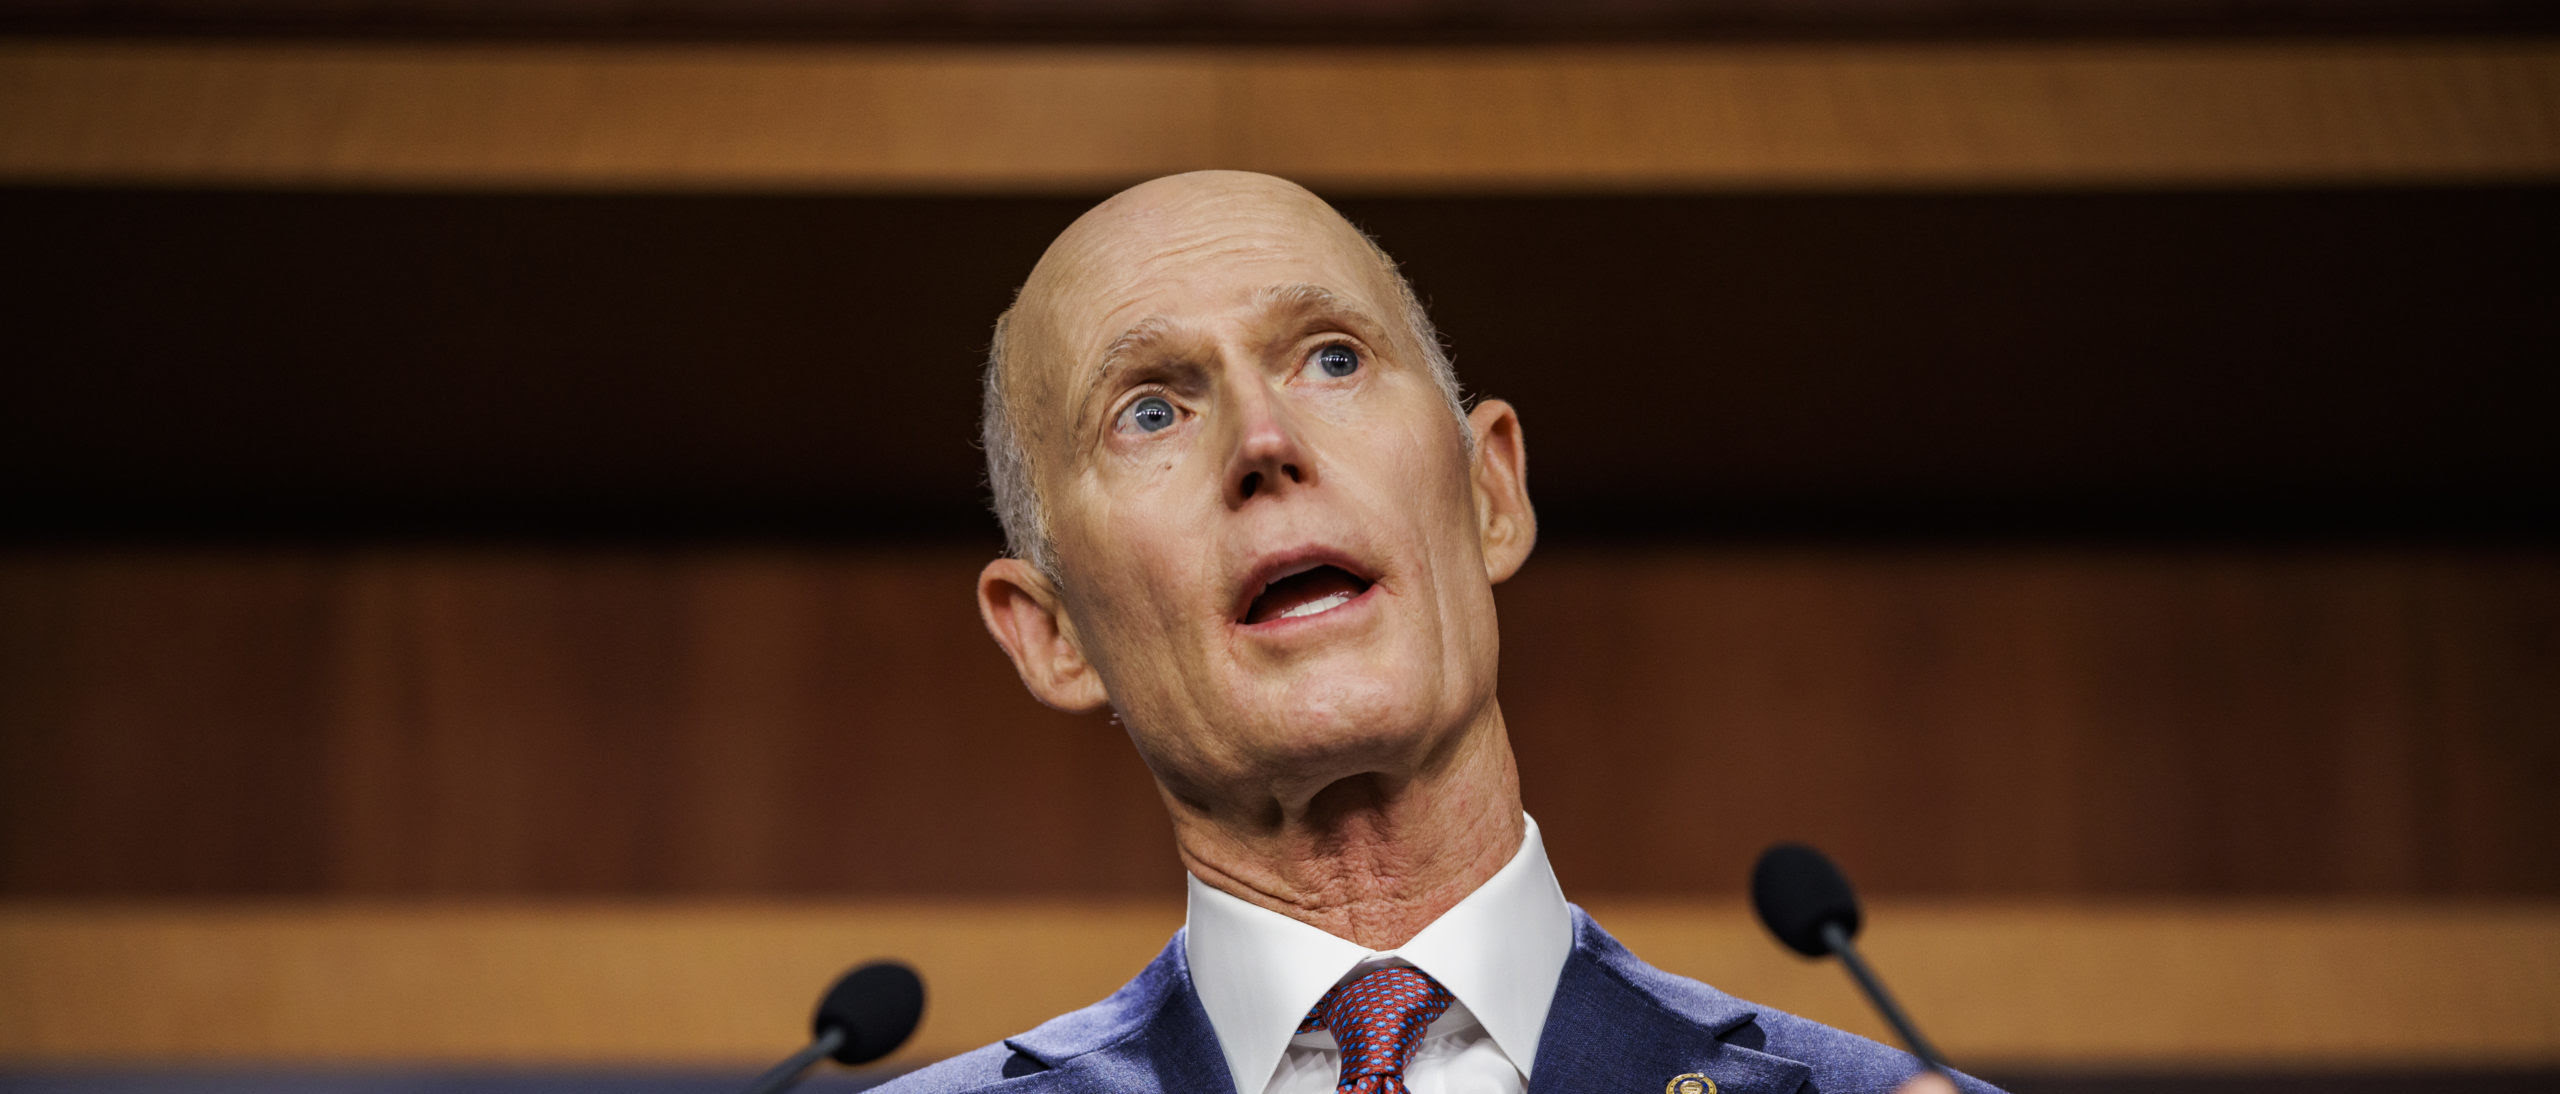 EXCLUSIVE: NRSC Chairman Rick Scott Says One Key Demographic Will Help Republicans Win In 2022